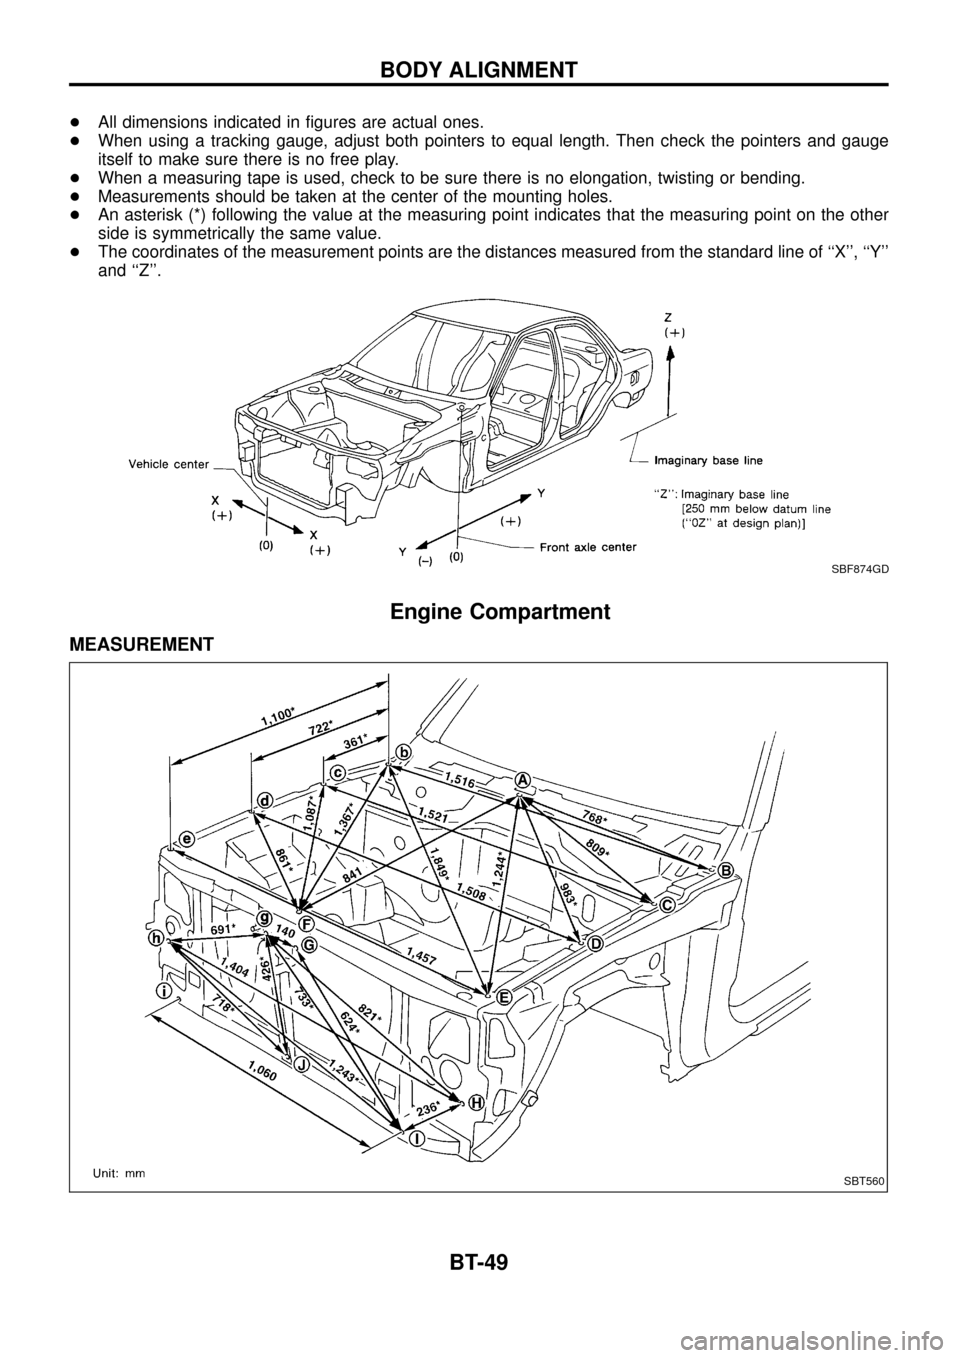 NISSAN PATROL 1998 Y61 / 5.G Body Workshop Manual +All dimensions indicated in ®gures are actual ones.
+When using a tracking gauge, adjust both pointers to equal length. Then check the pointers and gauge
itself to make sure there is no free play.
+